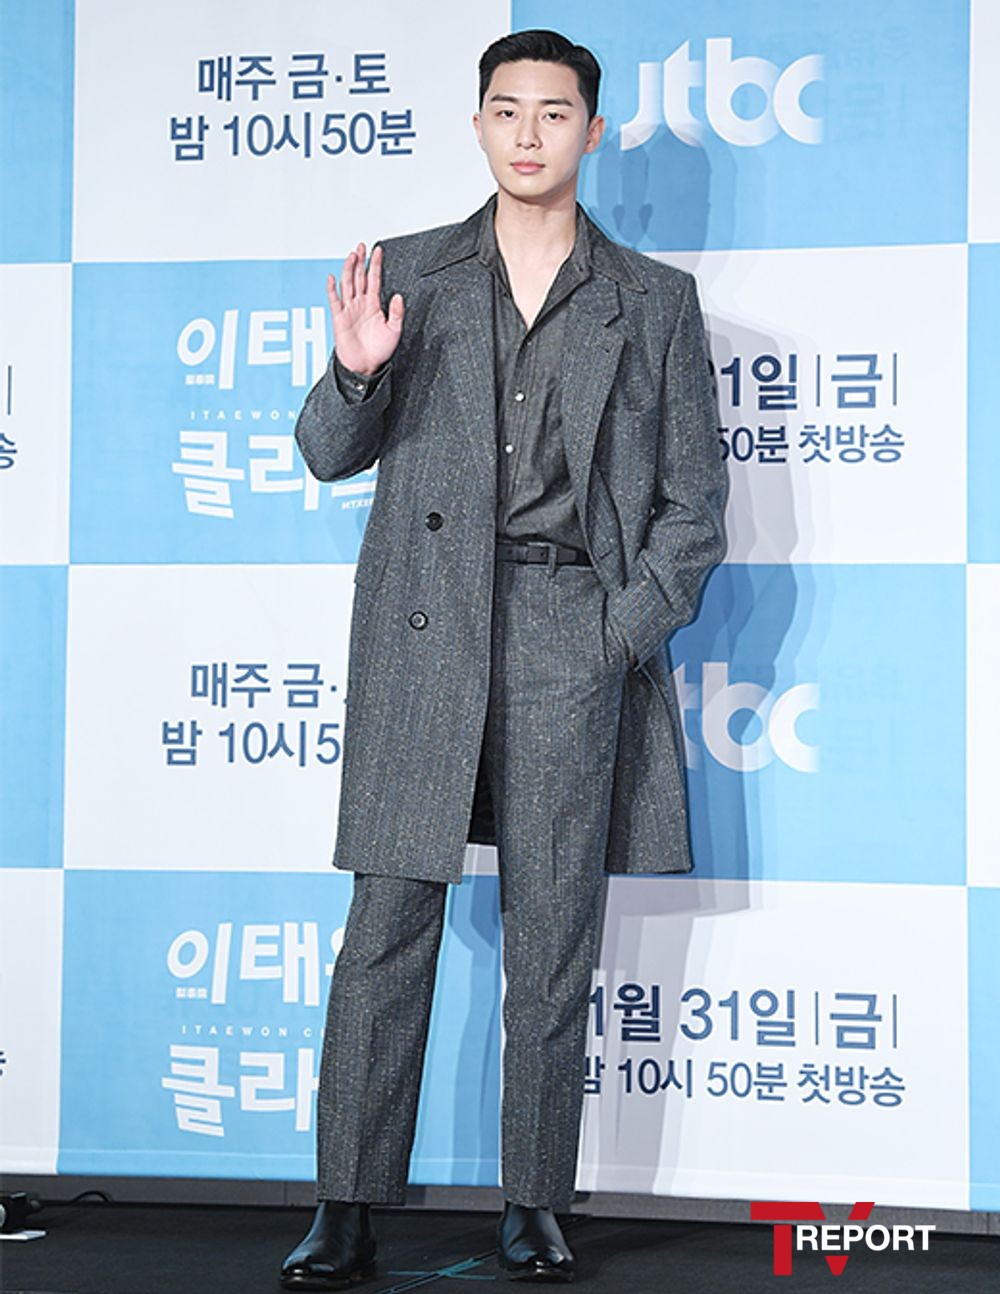 Actor Park Seo-joon attended the JTBC gilt drama Itaewon Clath production presentation held at the Conrad Hotel in Yeouido, Seoul Youngdeungpo District on the afternoon of the 30th.Itaewon Klath is a work that depicts the Hip Rebellion of Youths, who are united in an unreasonable world, stubbornness and passengerhood, and will be broadcast for the first time on the 31st.